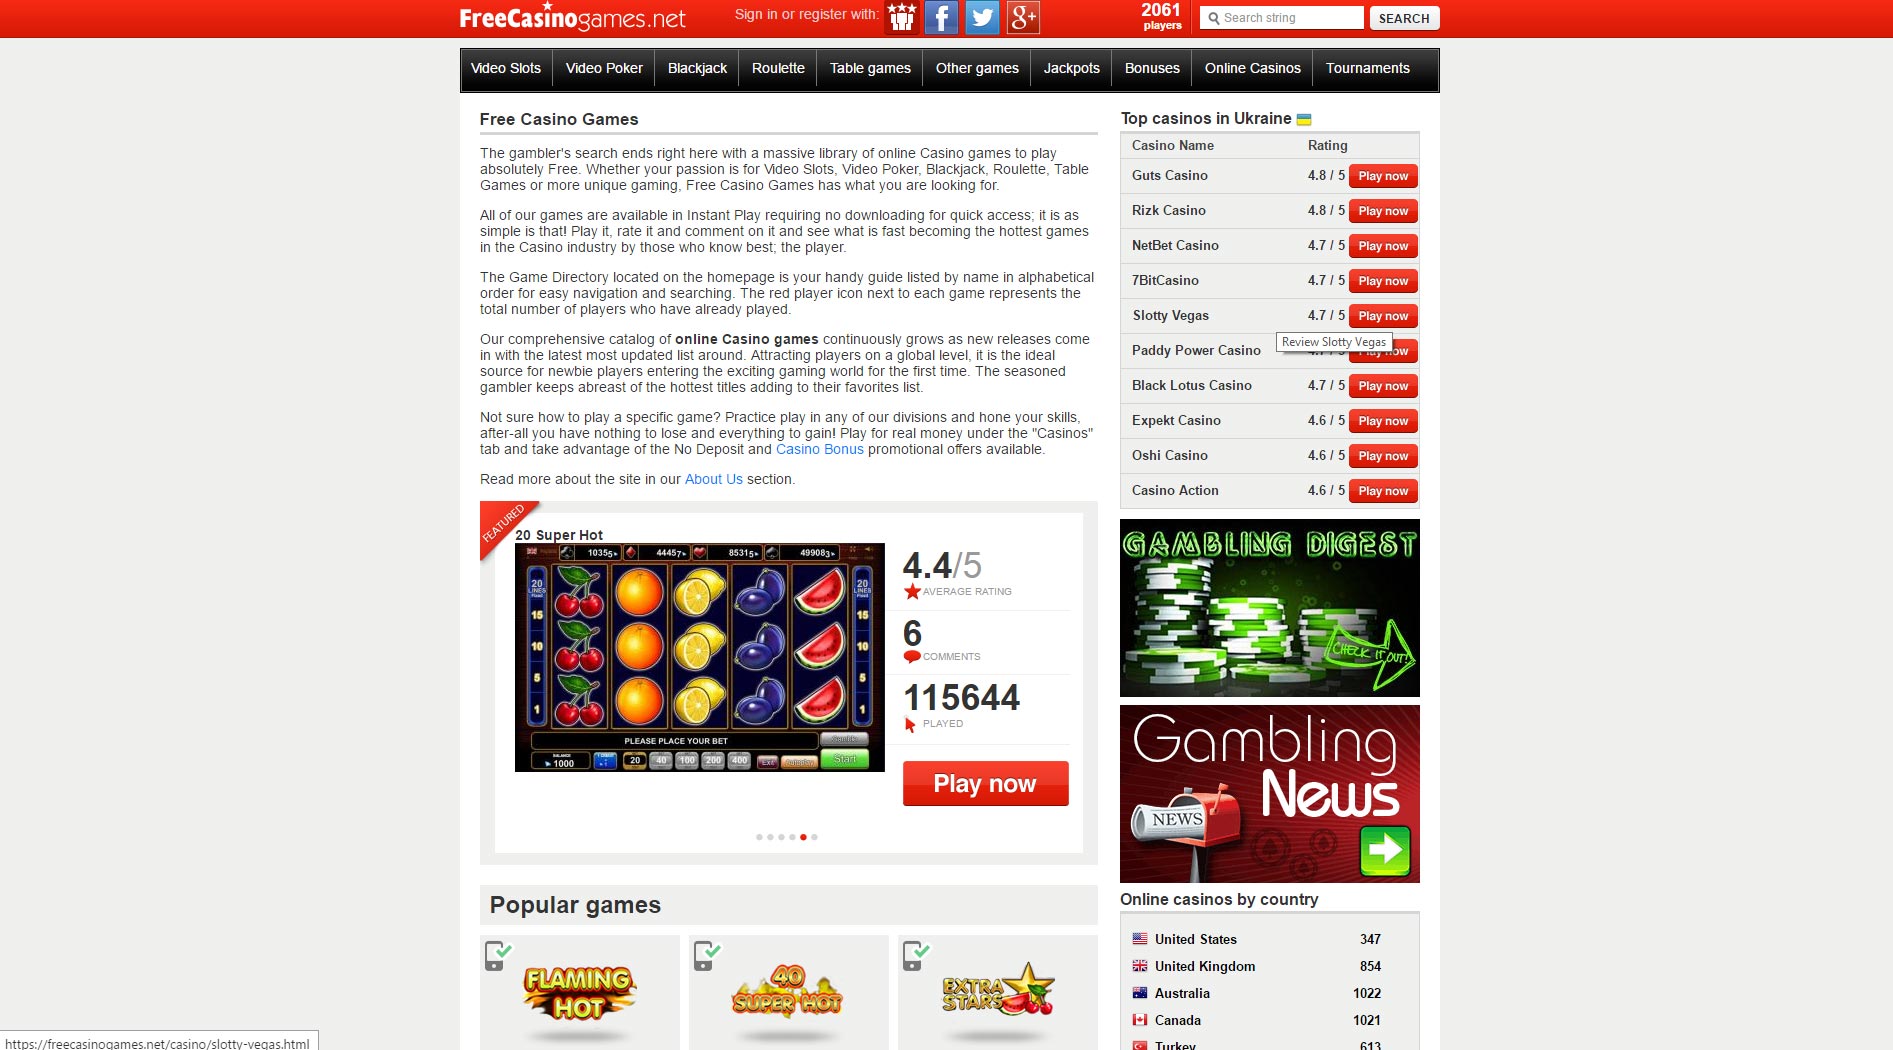 free of charge online casinos gives players casino money comps to check their